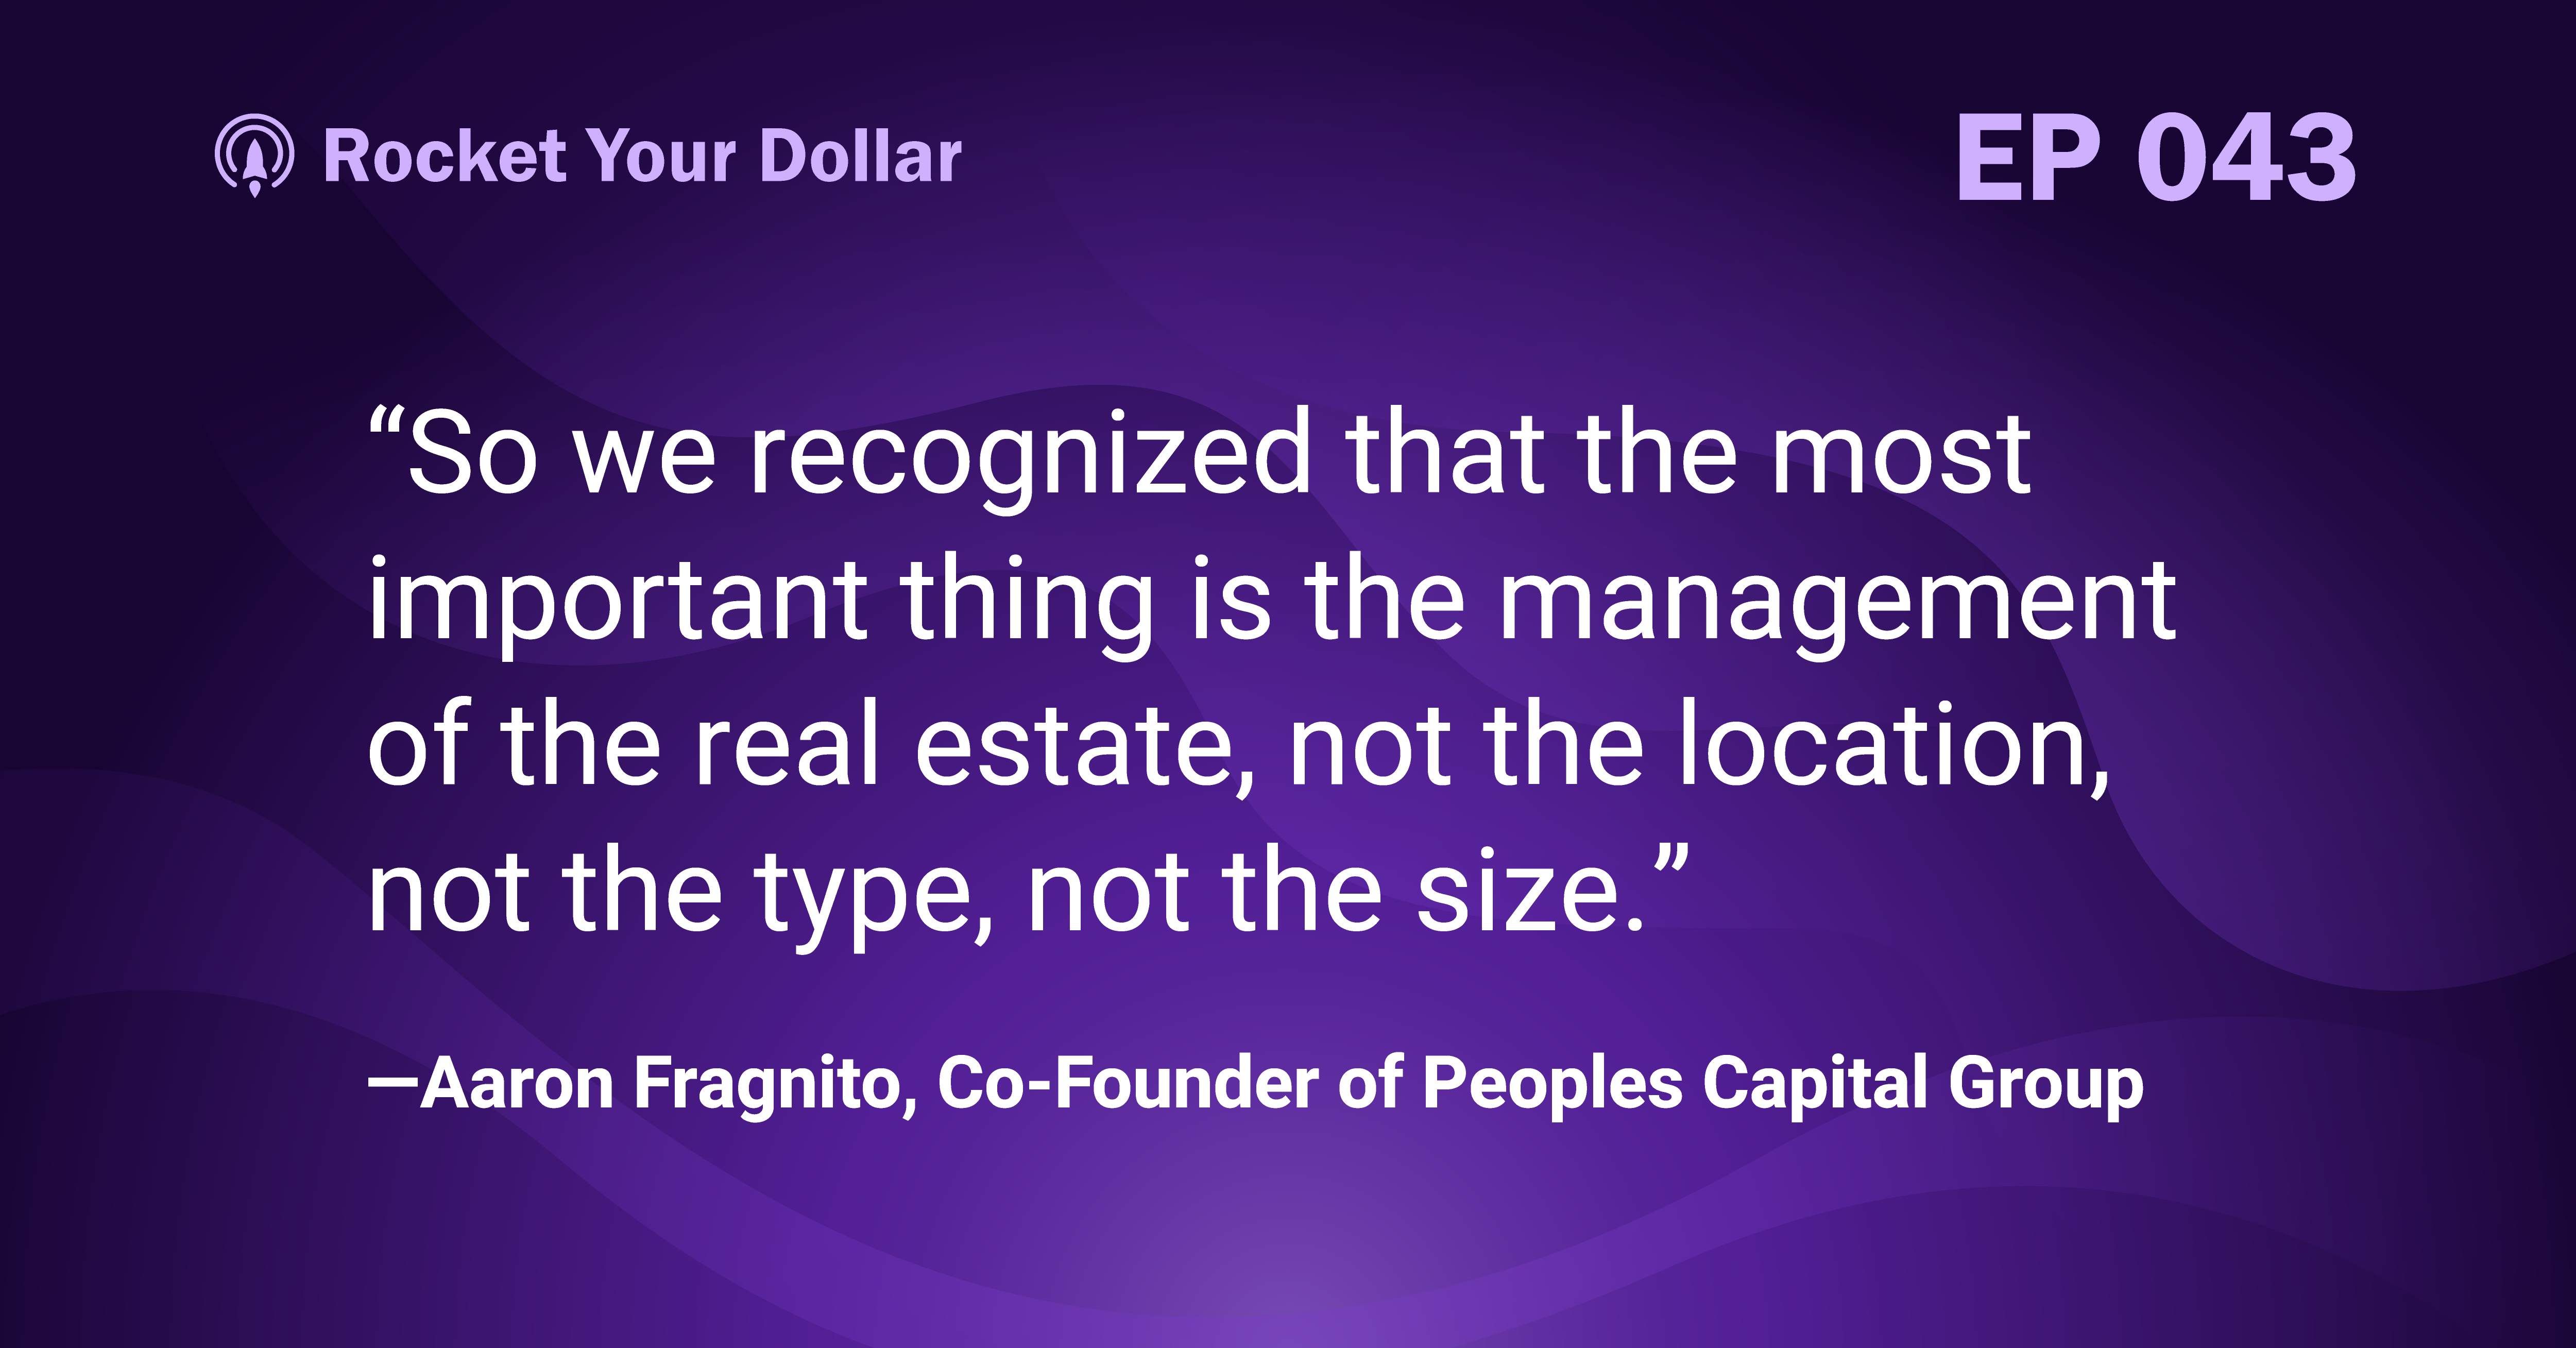 “So we recognized that the most important thing is the management of the real estate, not the location, not the type, not the size.” —Aaron Fragnito, Co-Founder of Peoples Capital Group